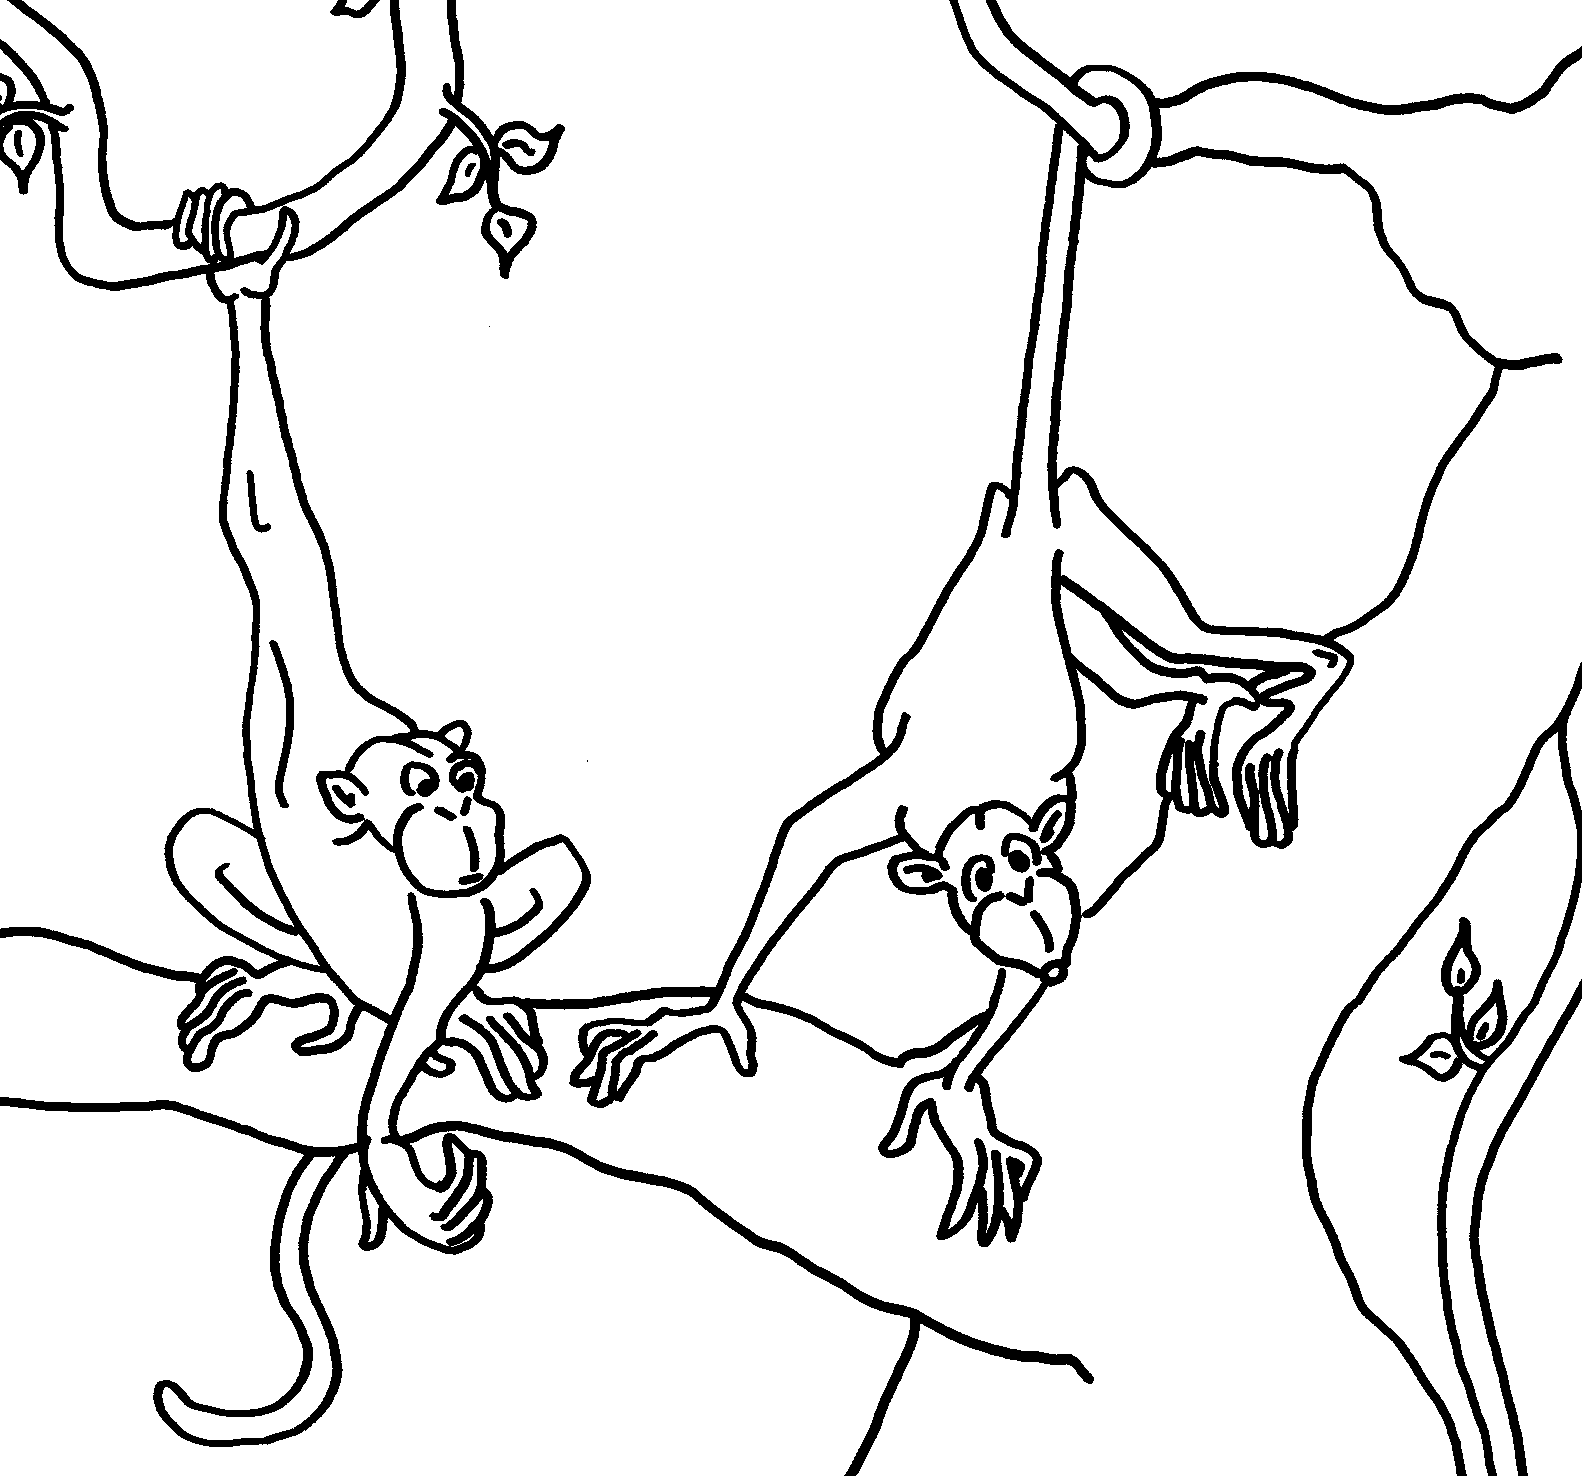 Monkey Coloring in Pages 1